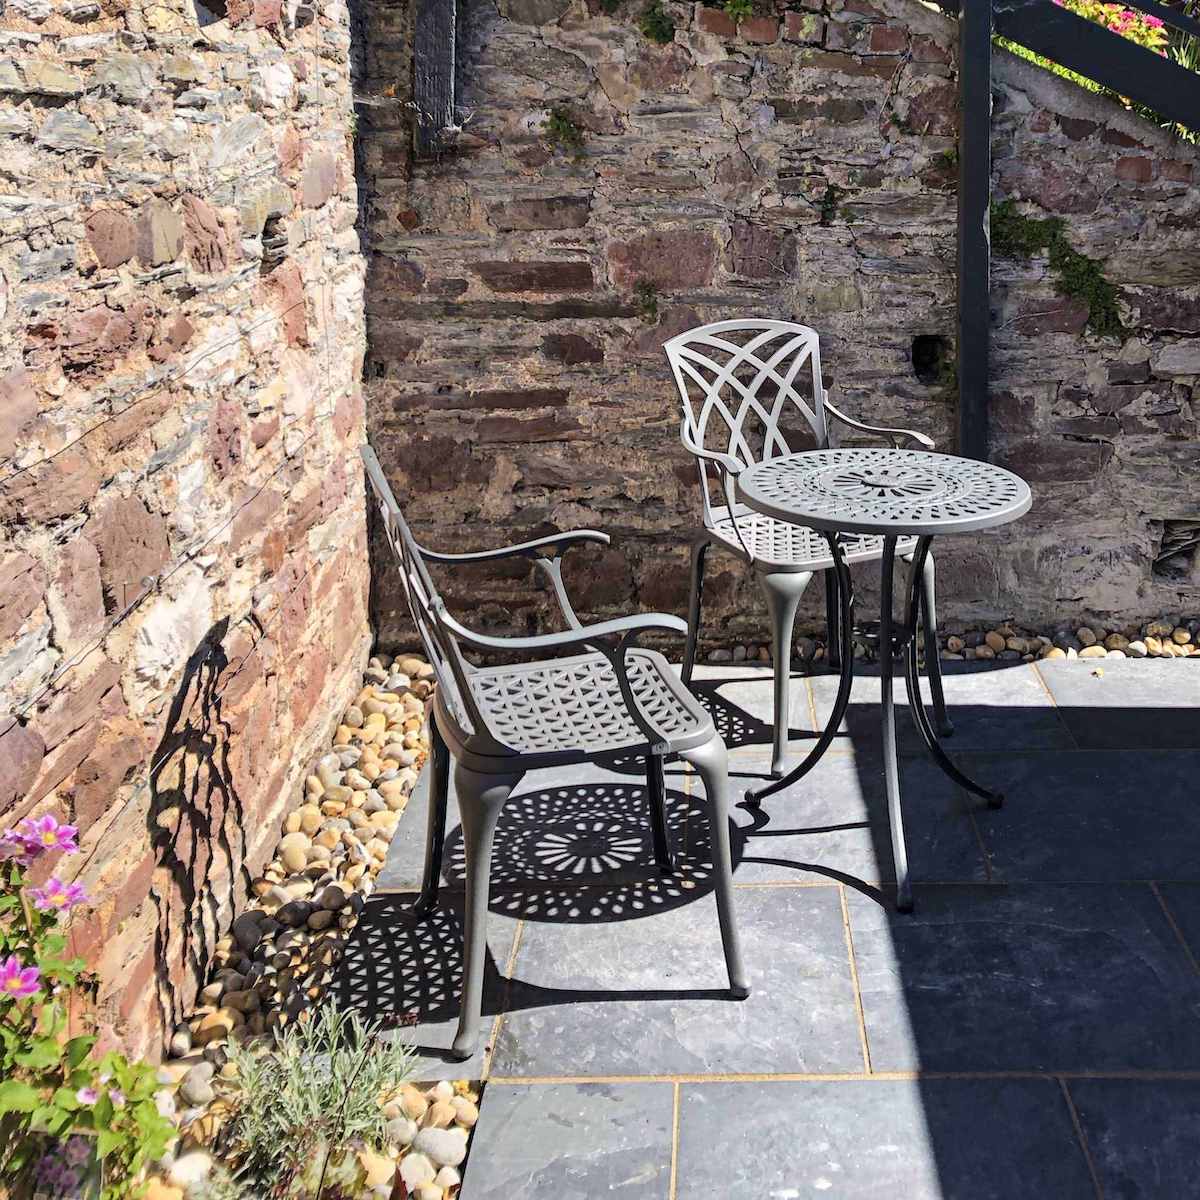 Why keep your patio clean and well-maintained?